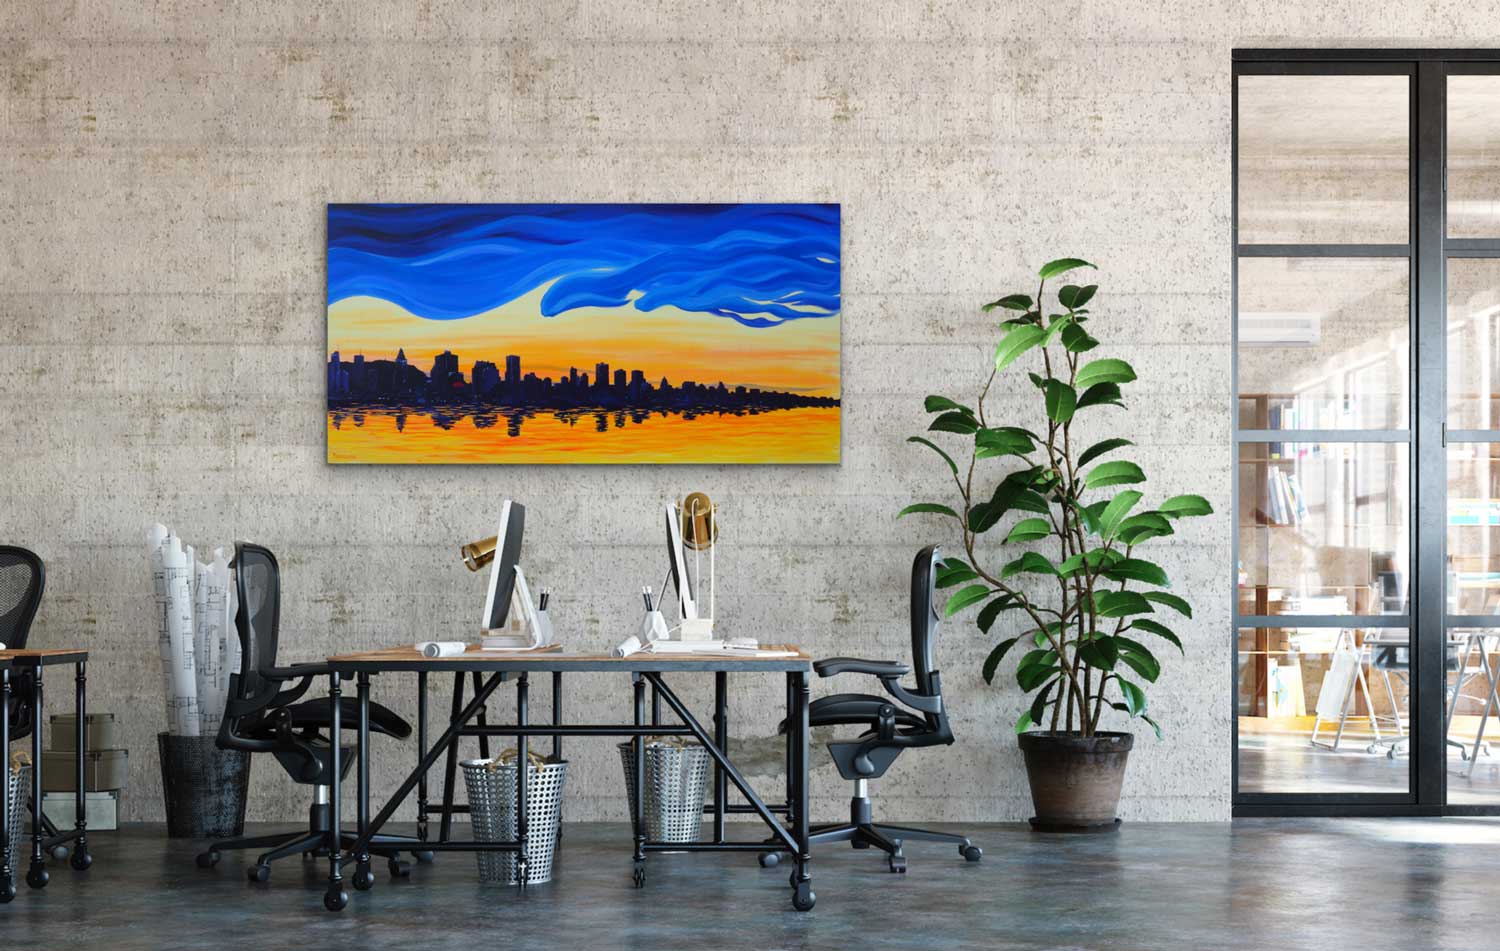 Large modern unique painting. Discover the breathtaking beauty of Downtown Montréal from the remarkable vantage point of Champlain Bridge. Original painting by a professional Canadian landscape artist. visual art ready to hang on your office or livingroom wall.